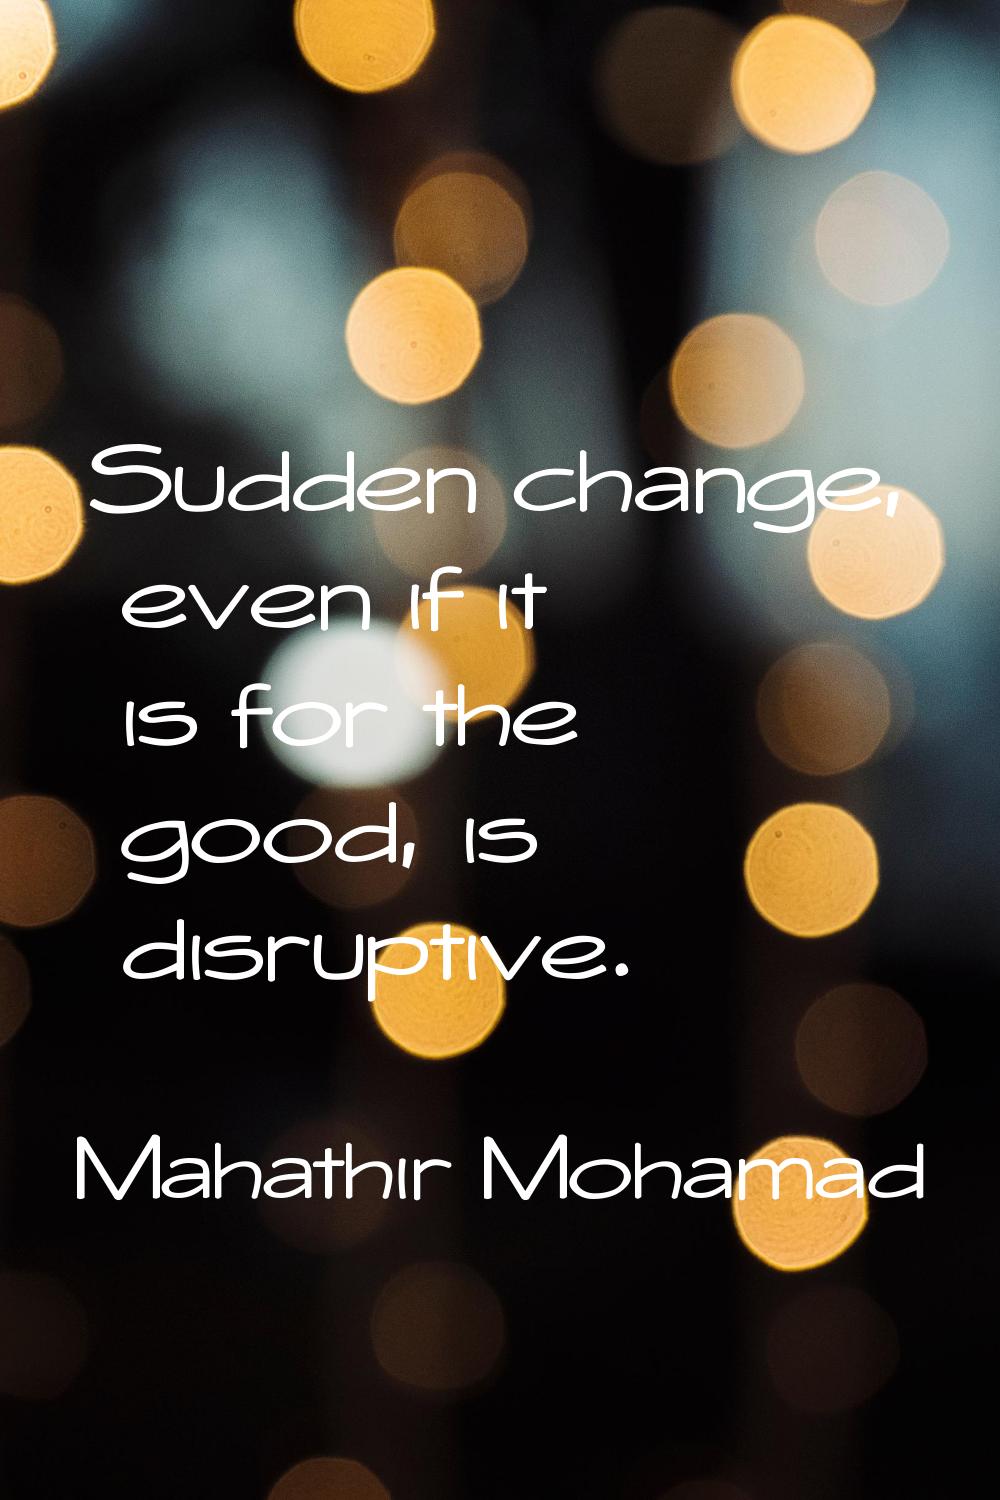 Sudden change, even if it is for the good, is disruptive.